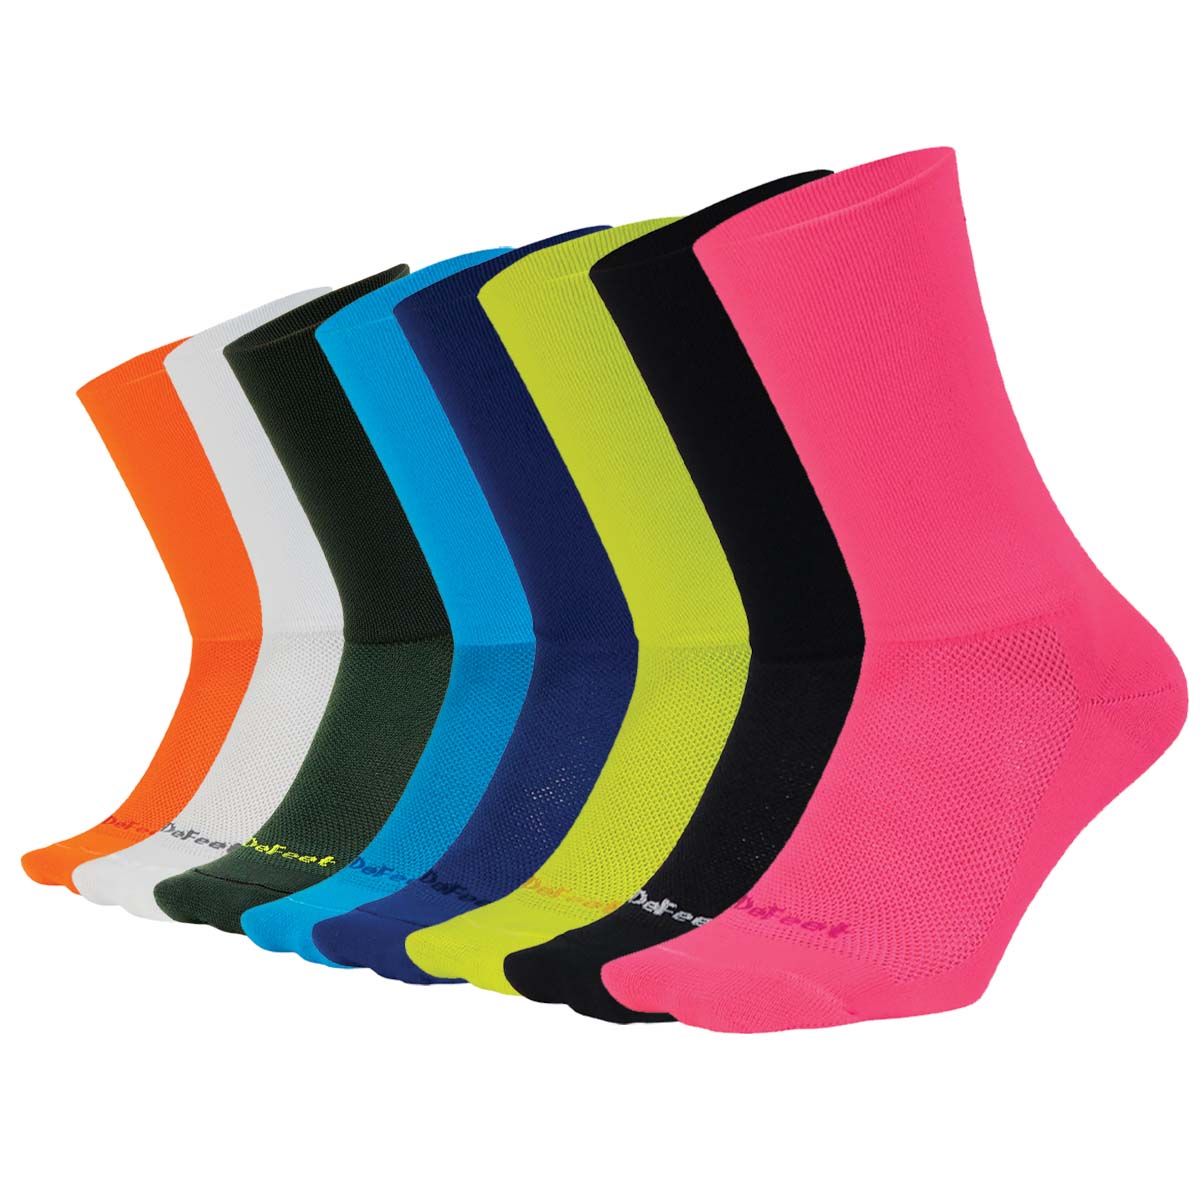 8 DeFeet Aireator 6" D-Logo solid color cycling socks with 6" double cuffs in 8 colors: orange, white, forest green, bright blue, navy, neon yellow, black, and hi-vis pink.